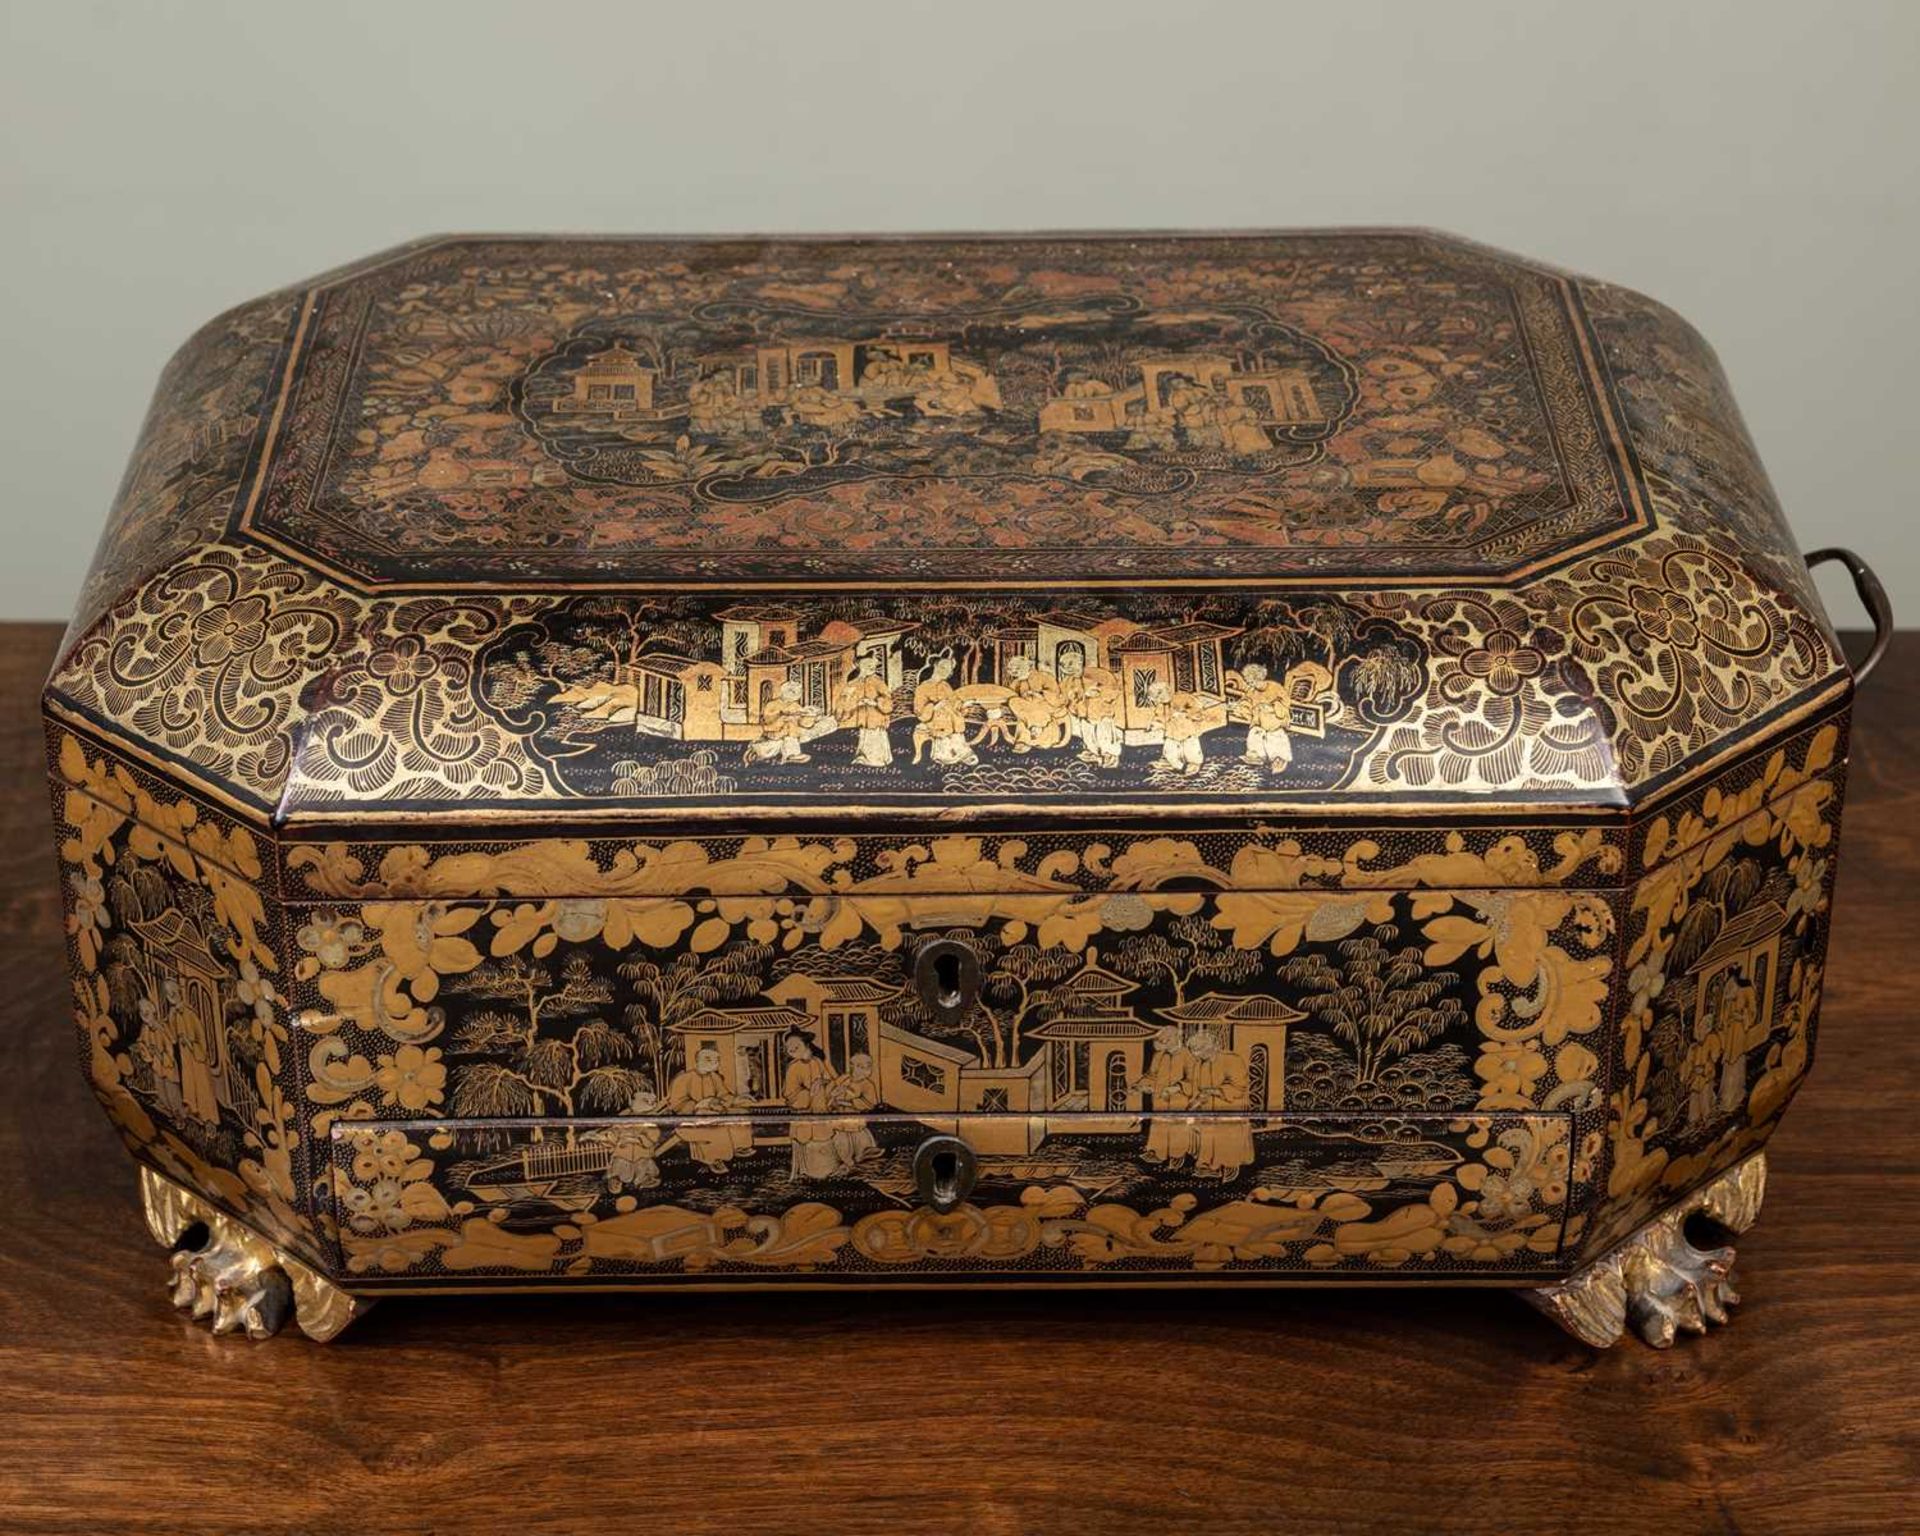 An antique Chinese lacquered work box with canted corners and carrying handles to the side, the